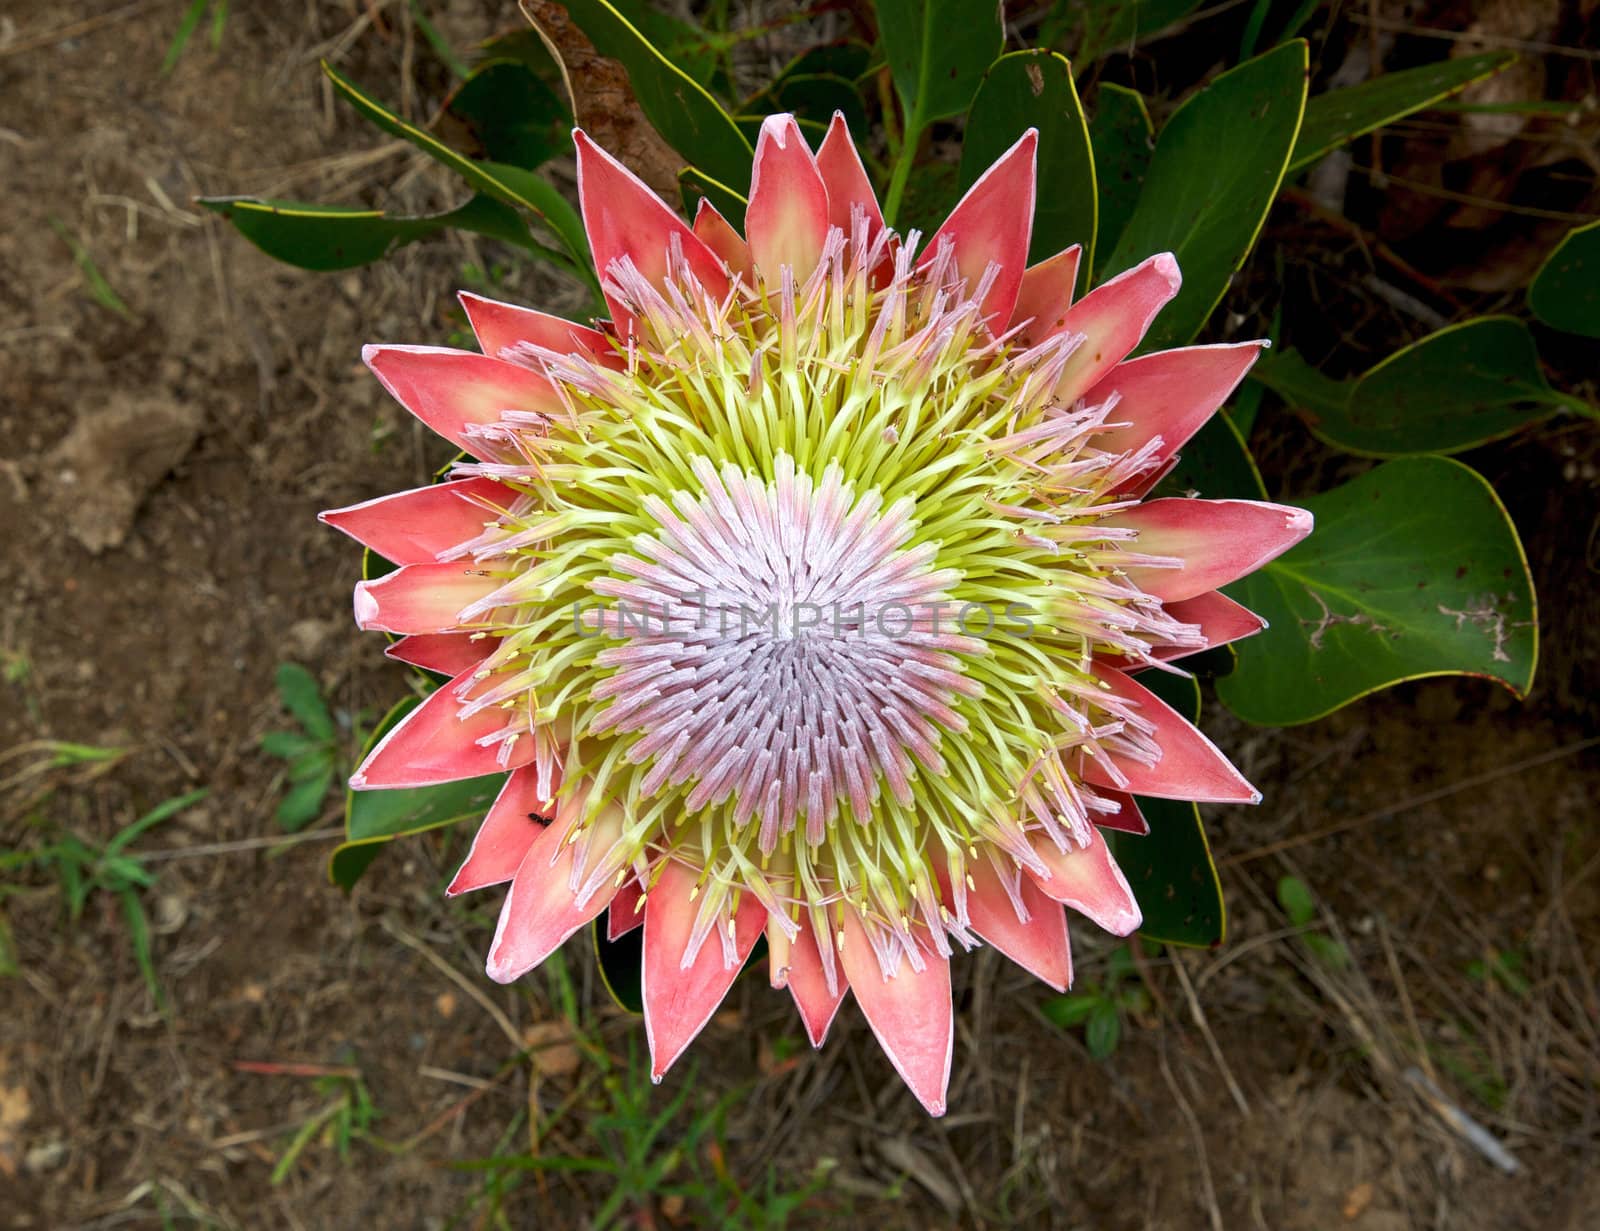 The King or Giant Protea, South Africa's national flower.